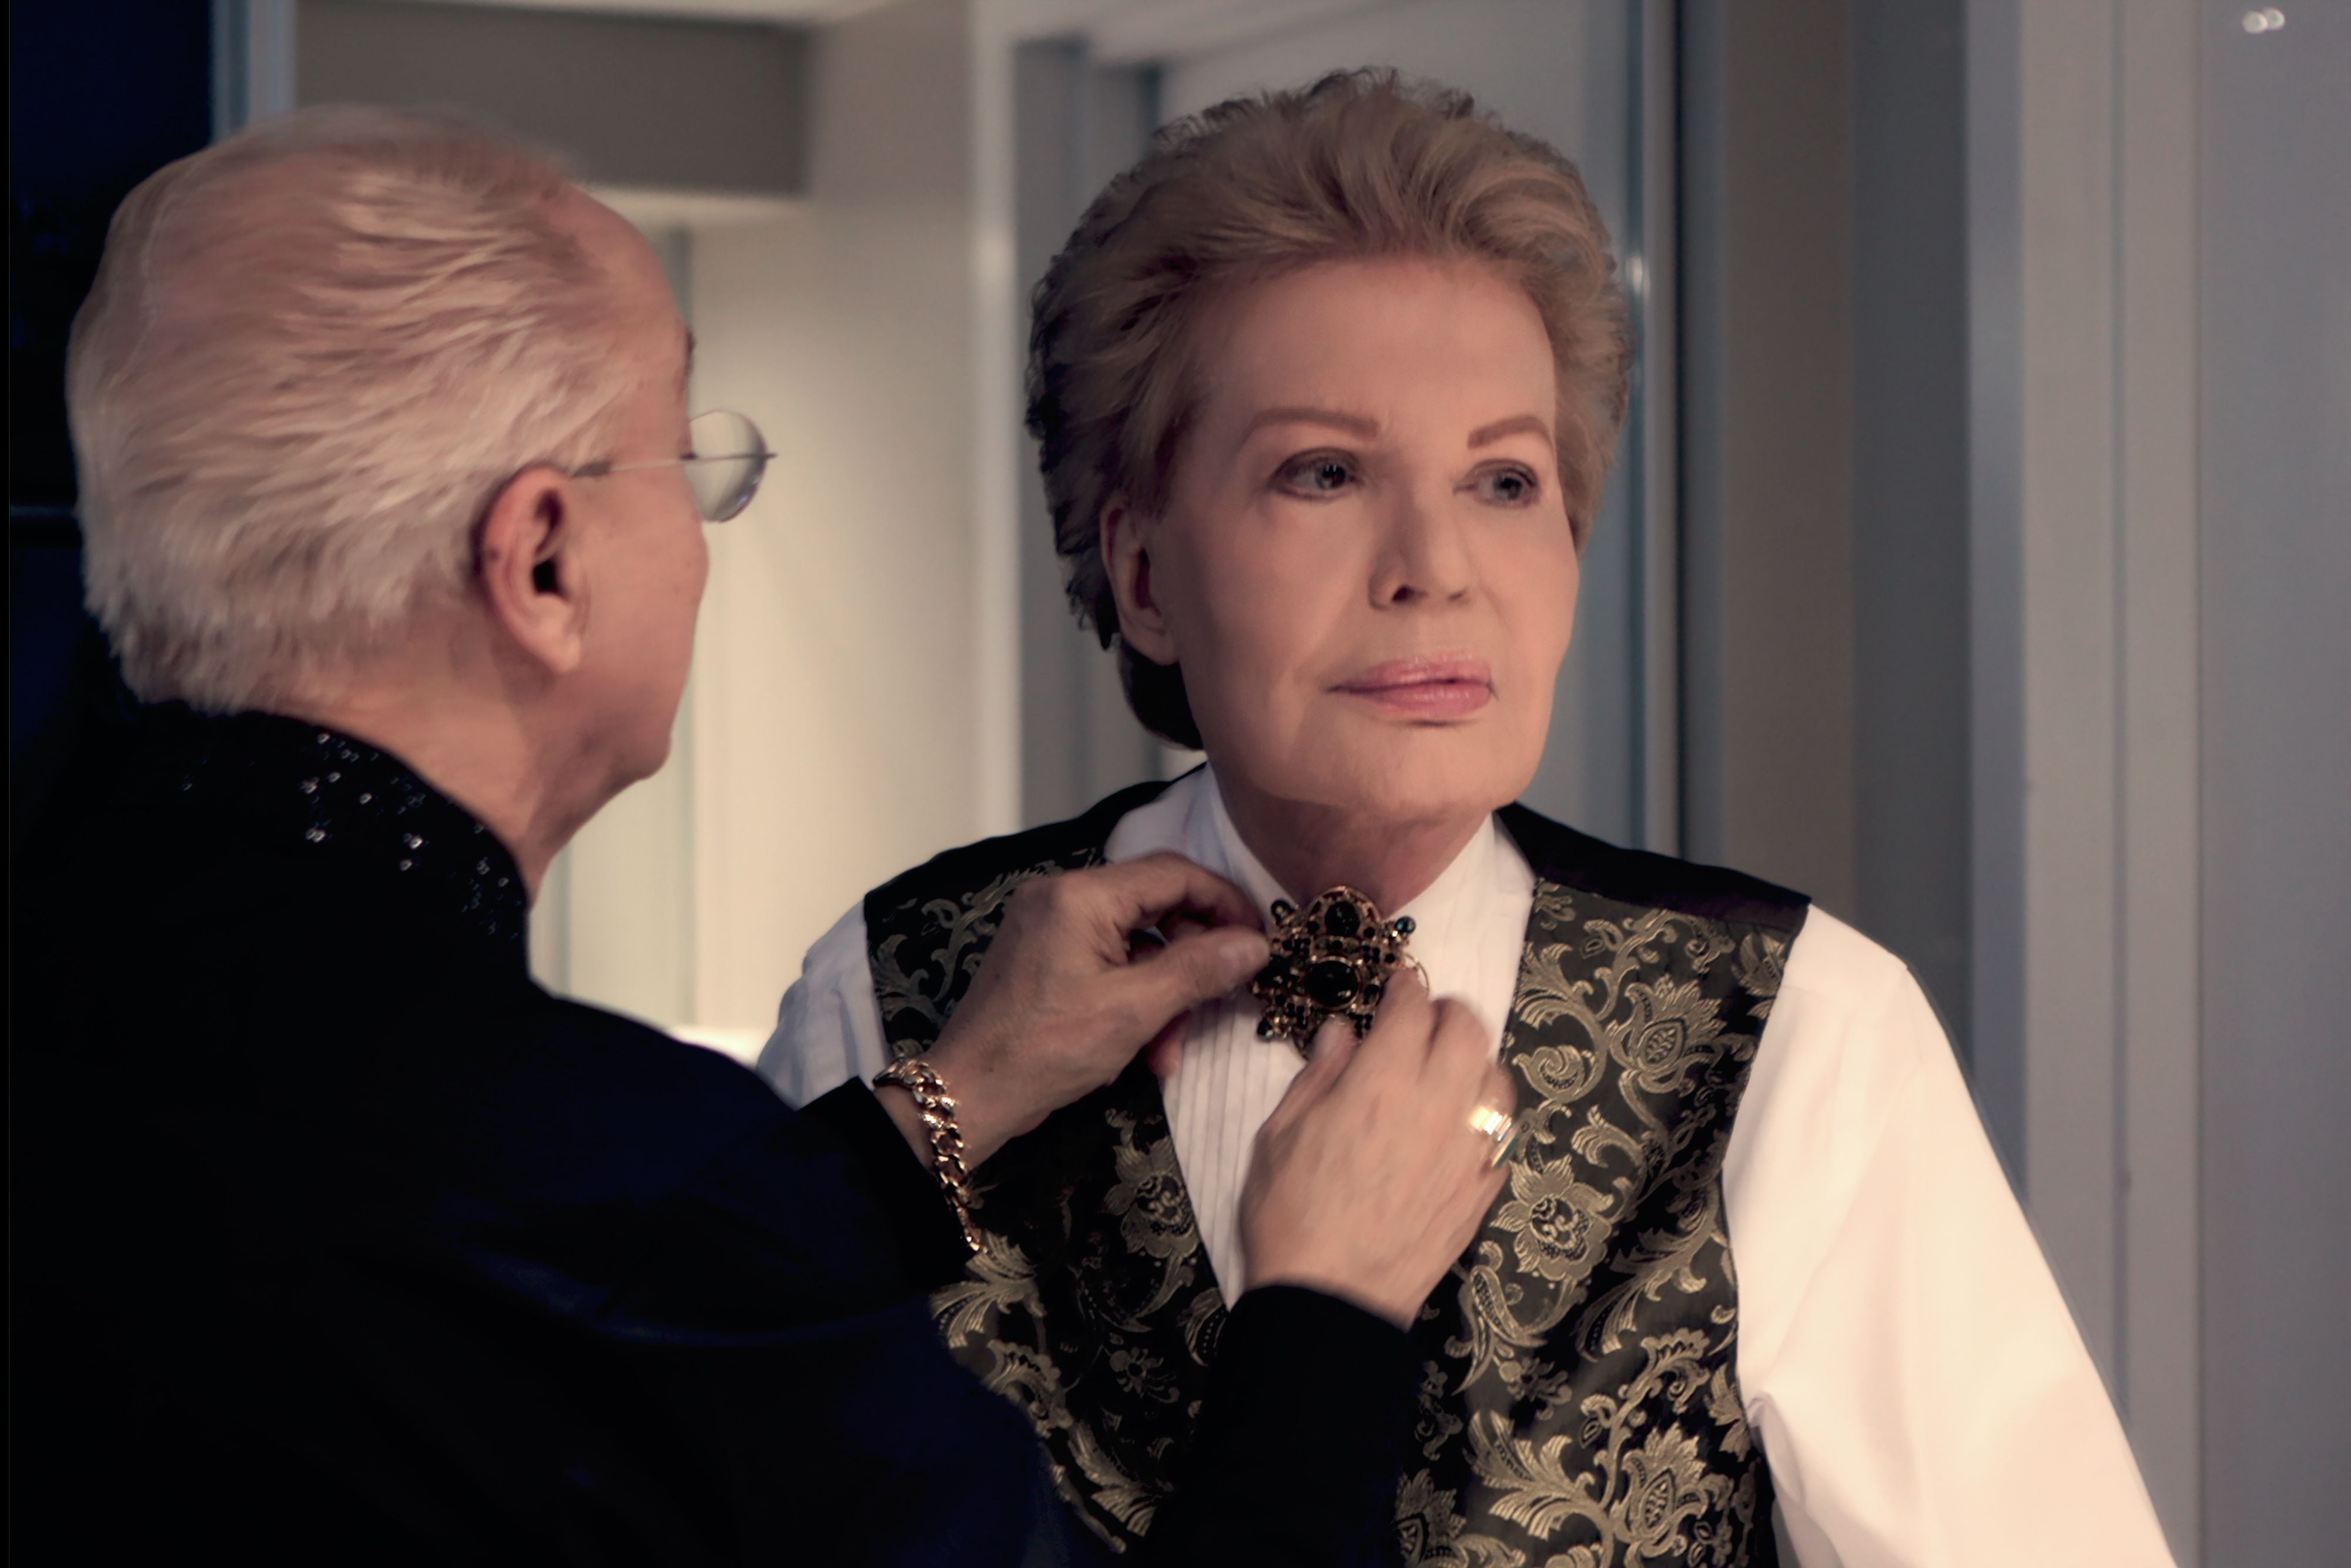 MUCHO MUCHO AMOR: THE LEGEND OF WALTER MERCADO (L to R) Willie Acosta and Walter Mercado in MUCHO MUCHO AMOR: THE LEGEND OF WALTER MERCADO. Cr. NETFLIX © 2020 